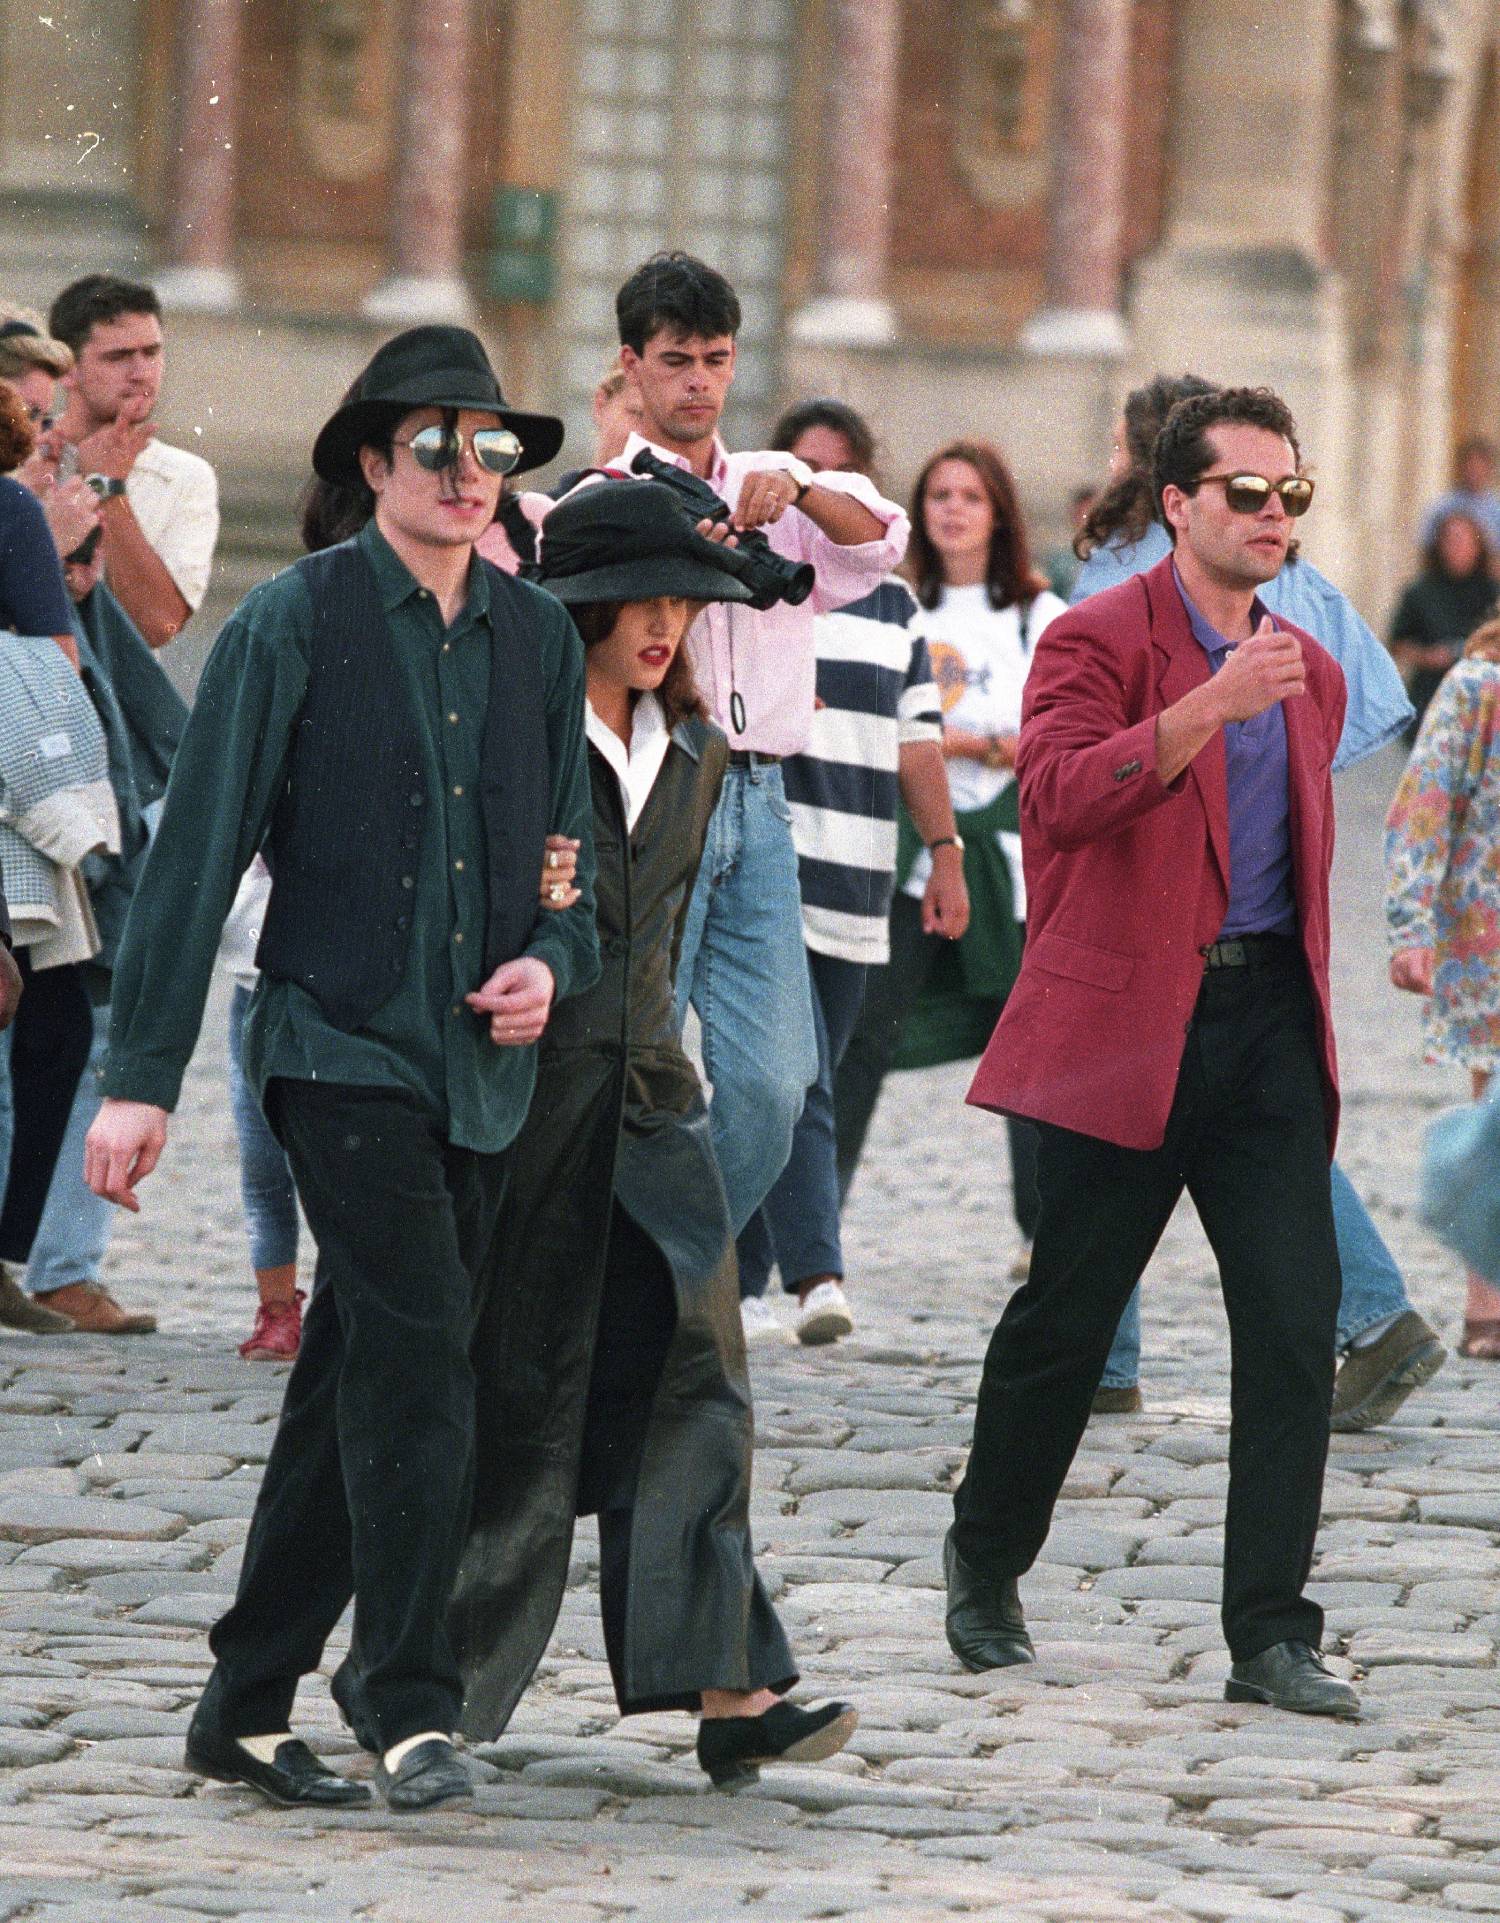 Michael Jackson and wife Lisa Marie Presley in 1995 at Versailles, France.